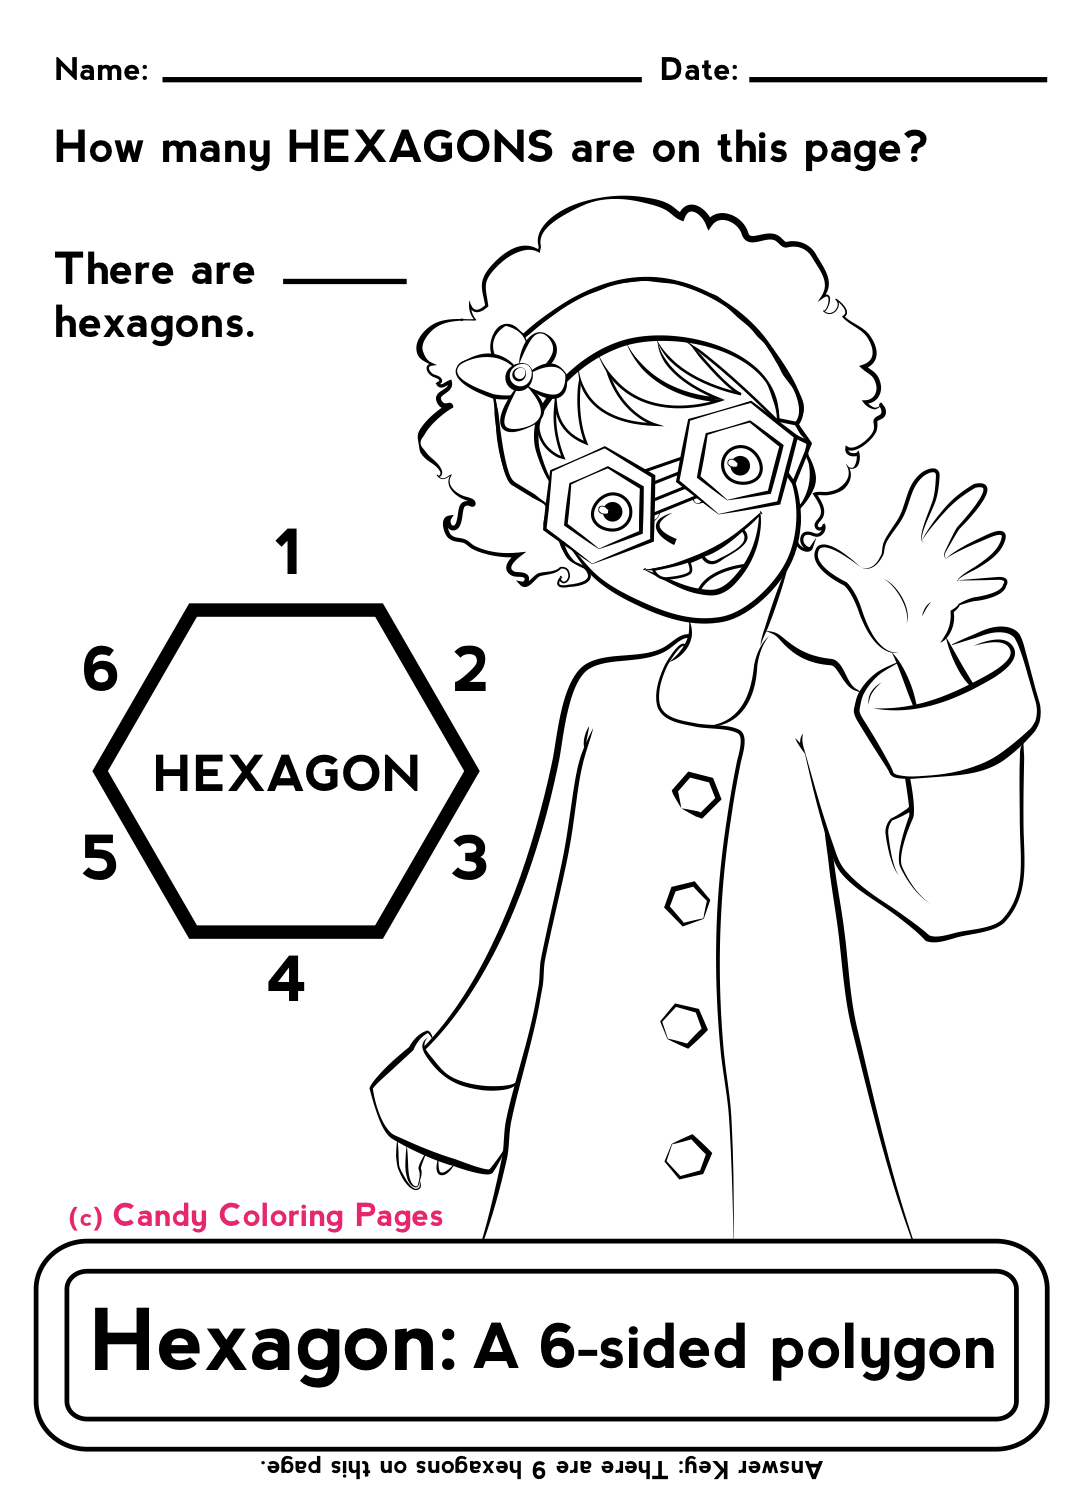 Math Worksheets Coloring Pages